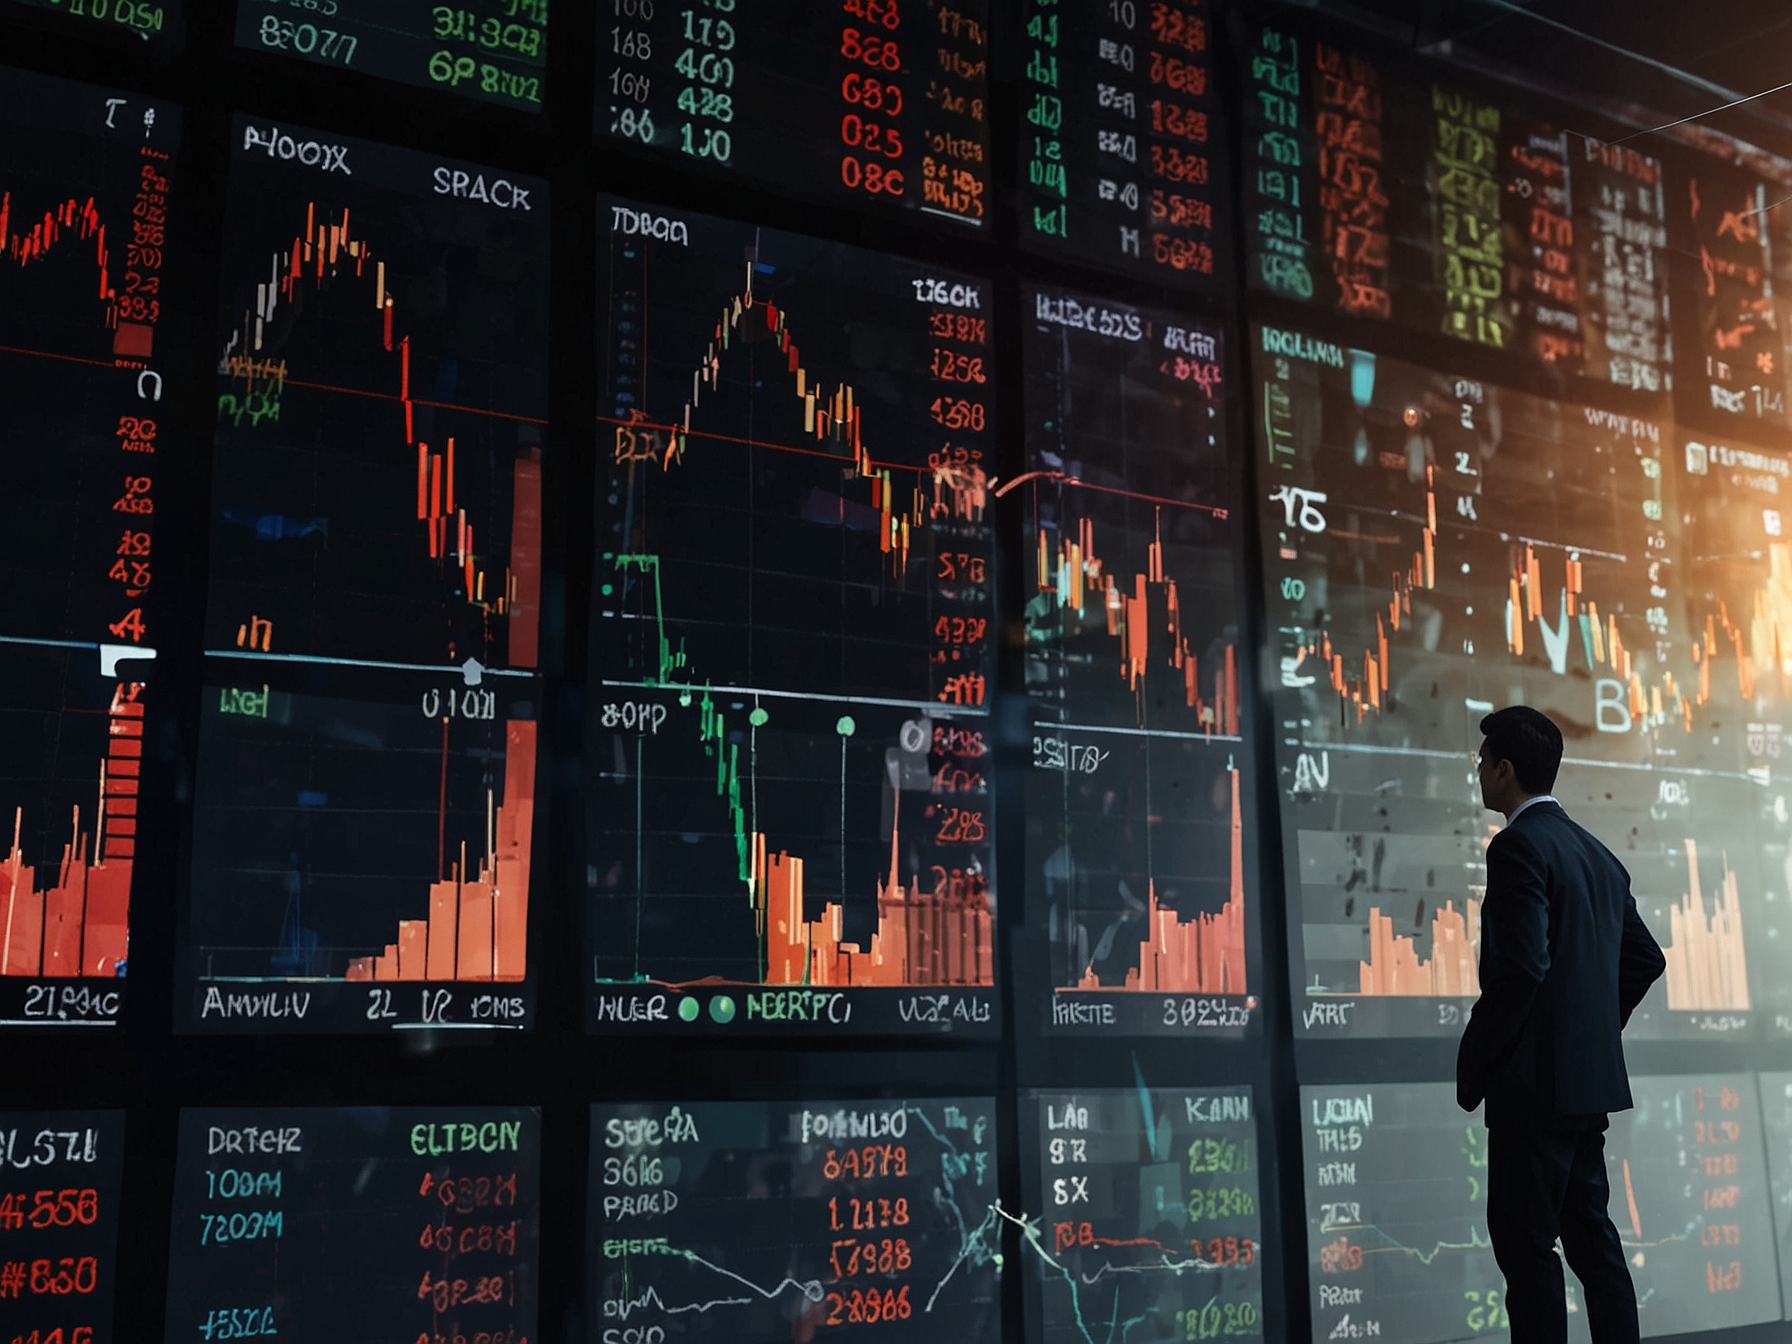 An image showing a stock market display with falling graphs and figures, reflecting the downturn in Asian stocks amid global market turbulence and economic instability.